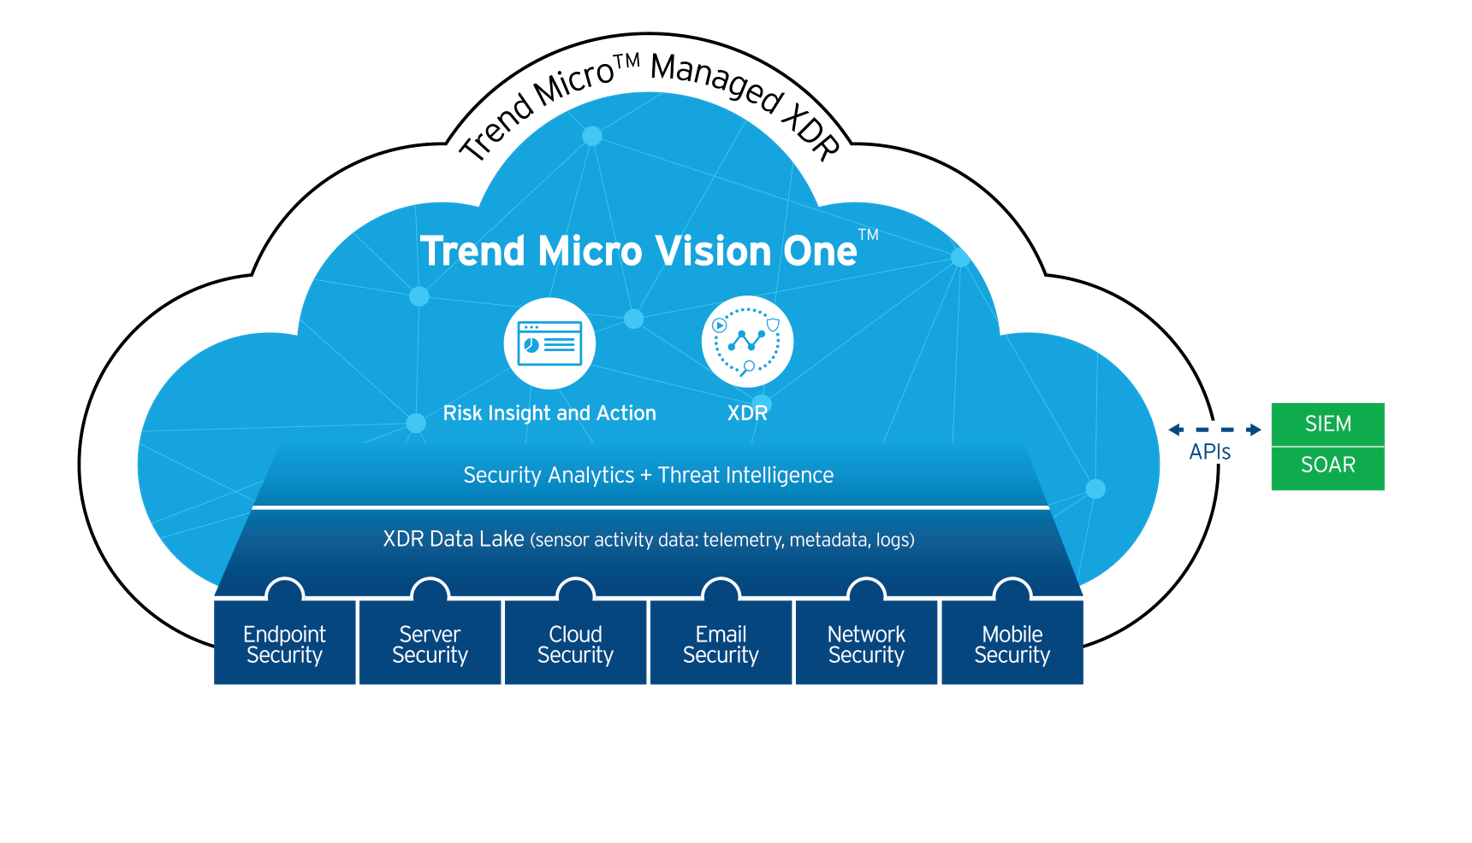 Trend Micro Vision One Architecture Image